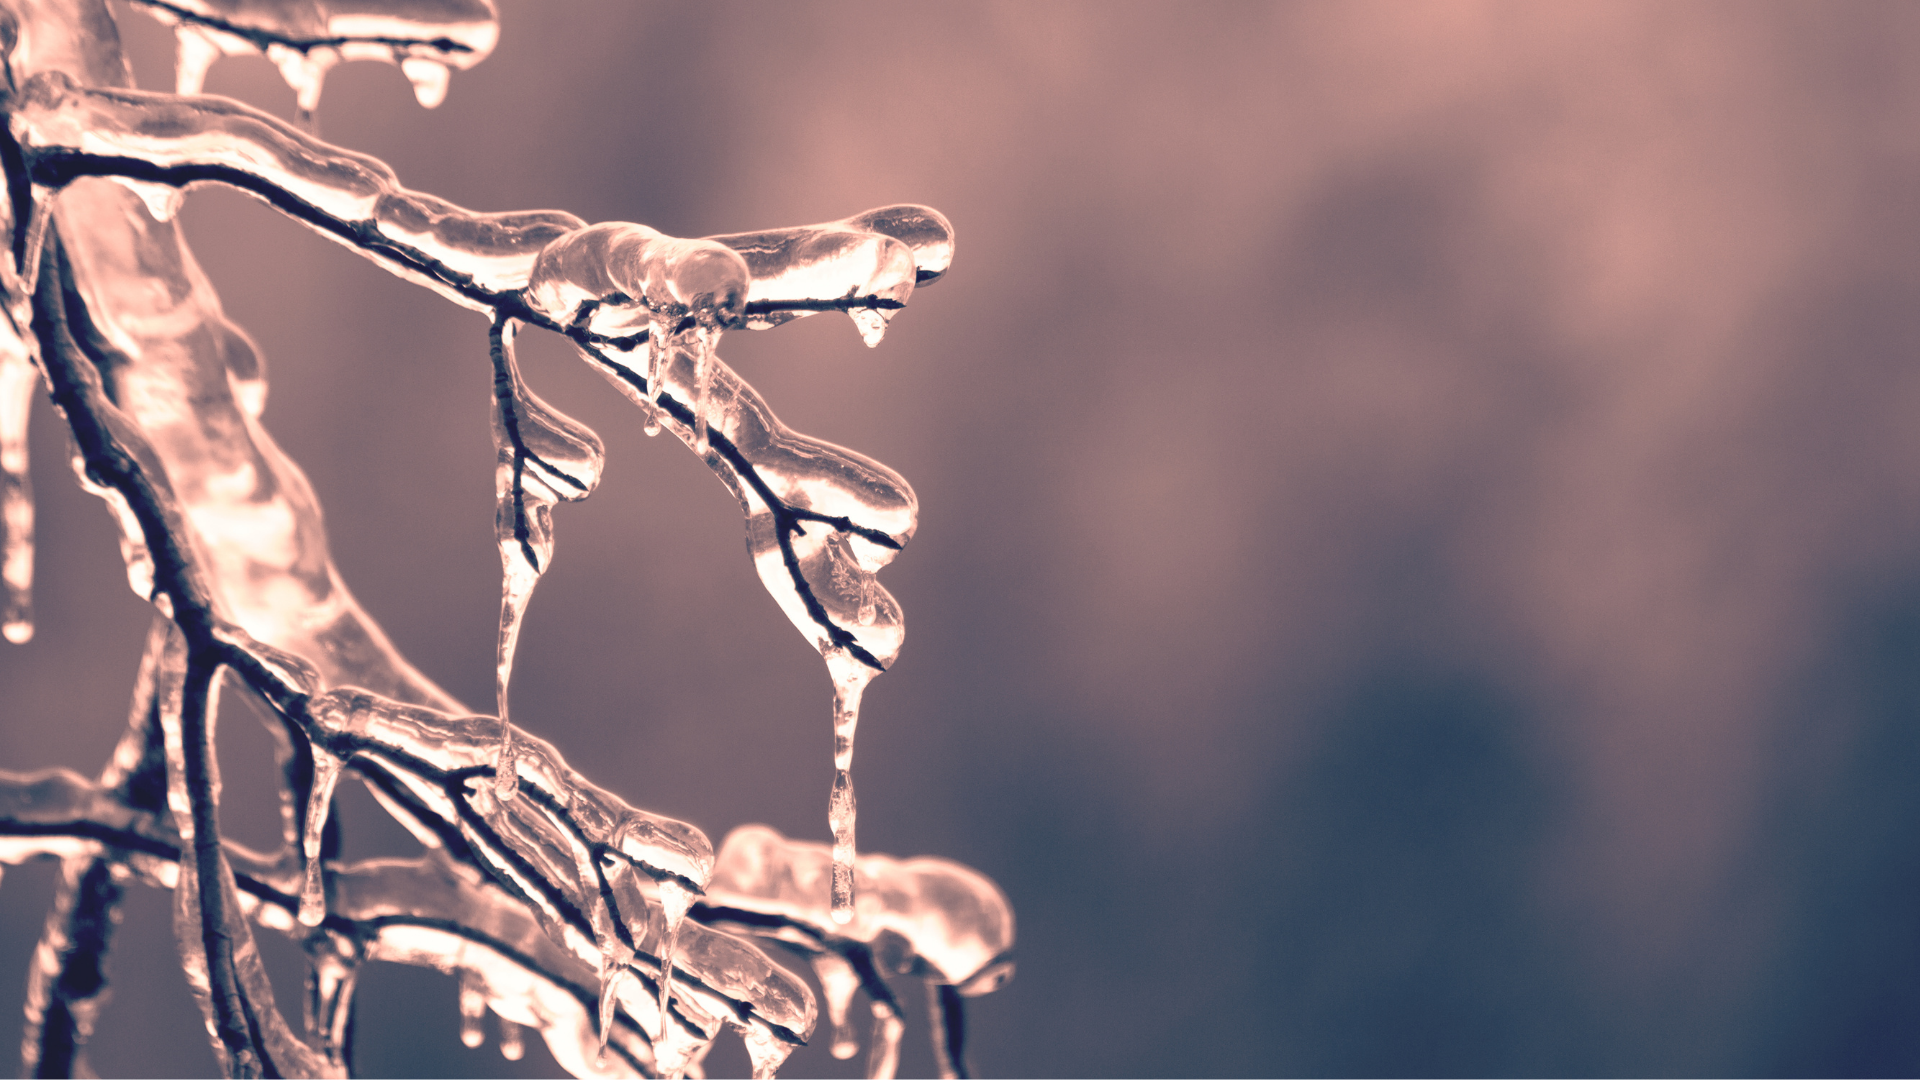 tree branches covered in ice